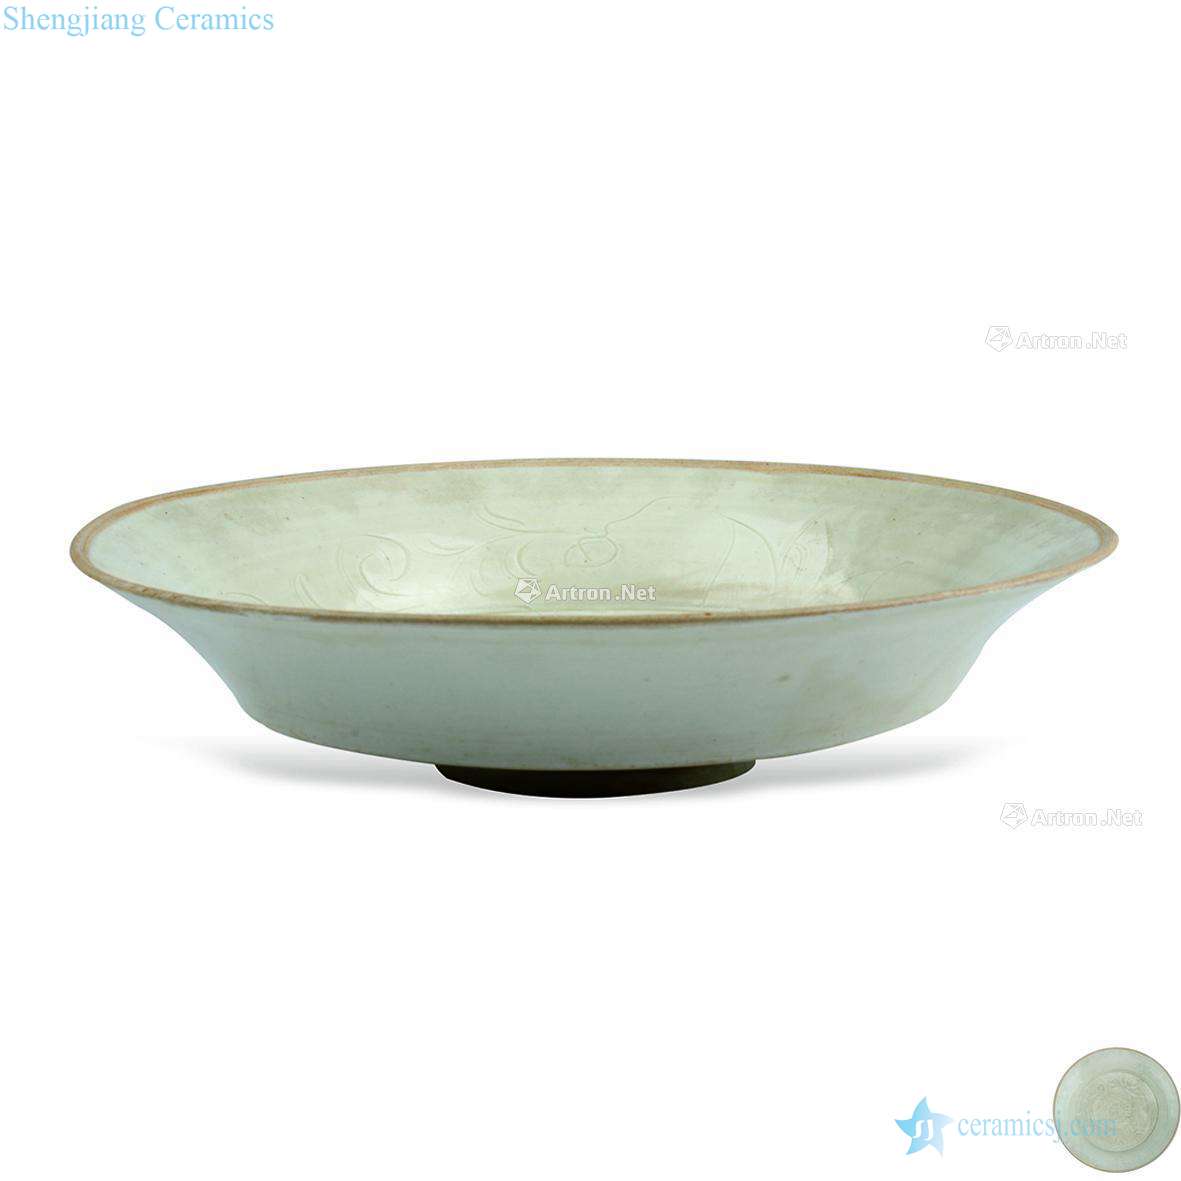 The song dynasty kiln carved bowl